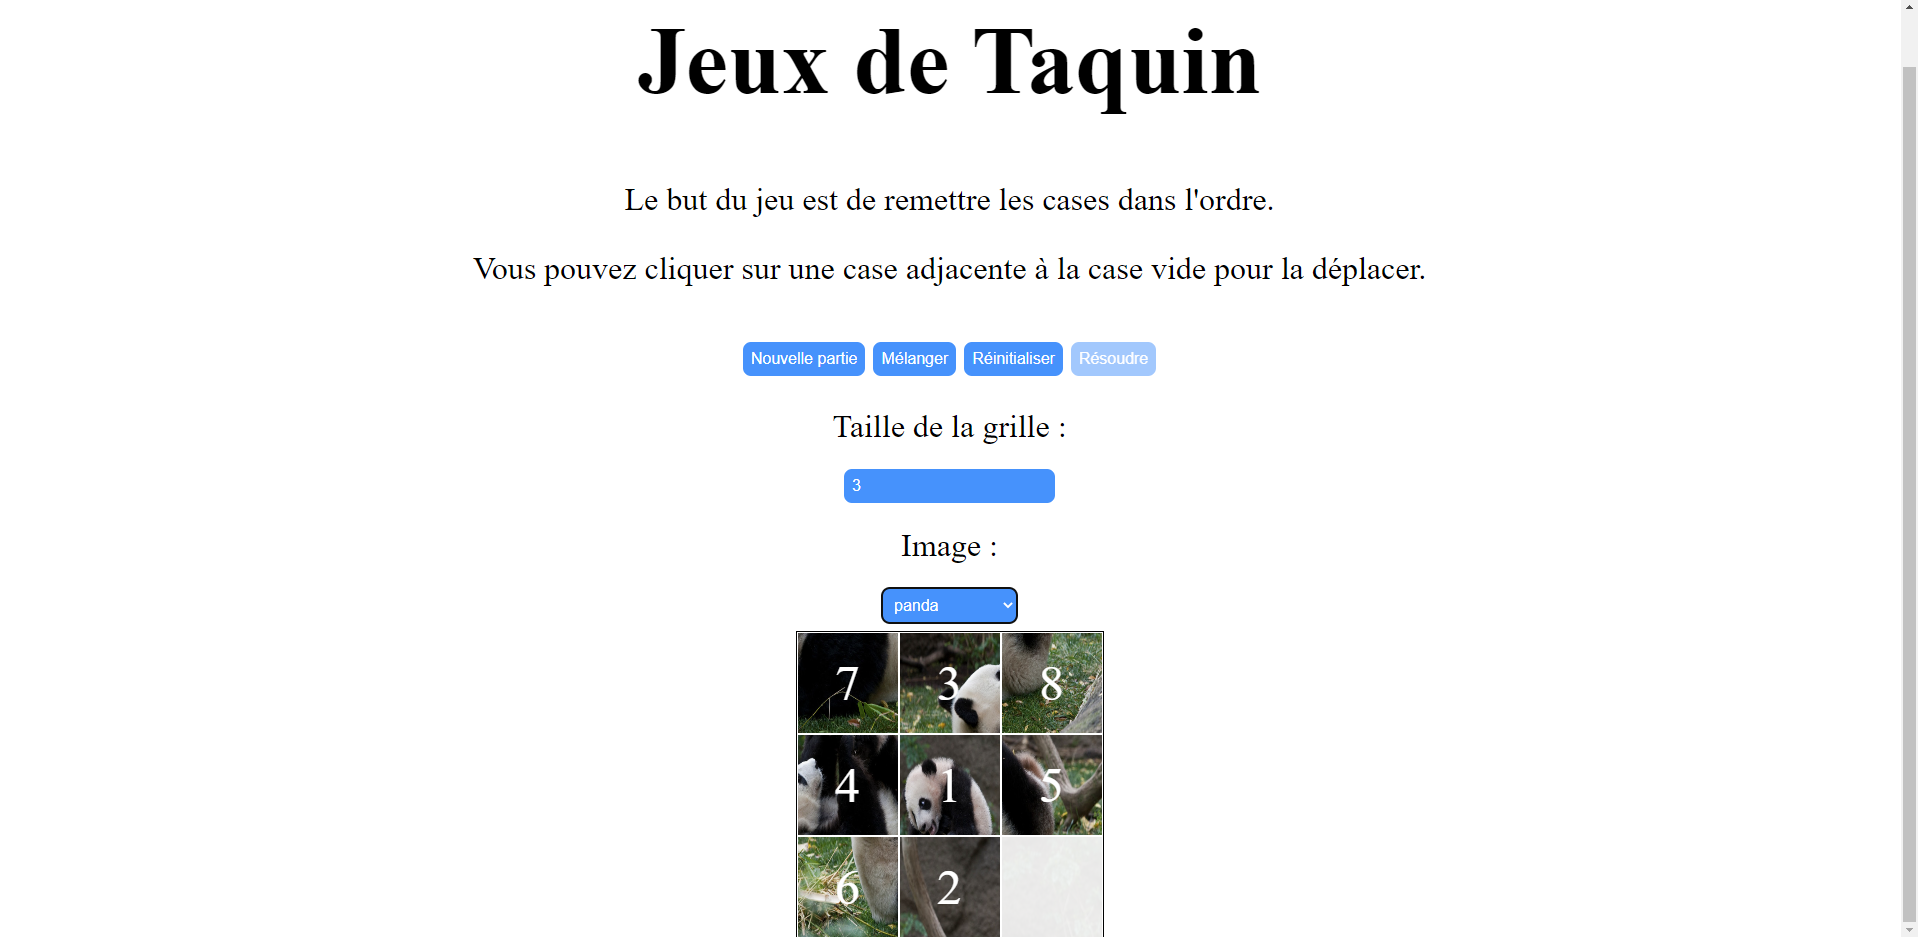 Taquin game in JS